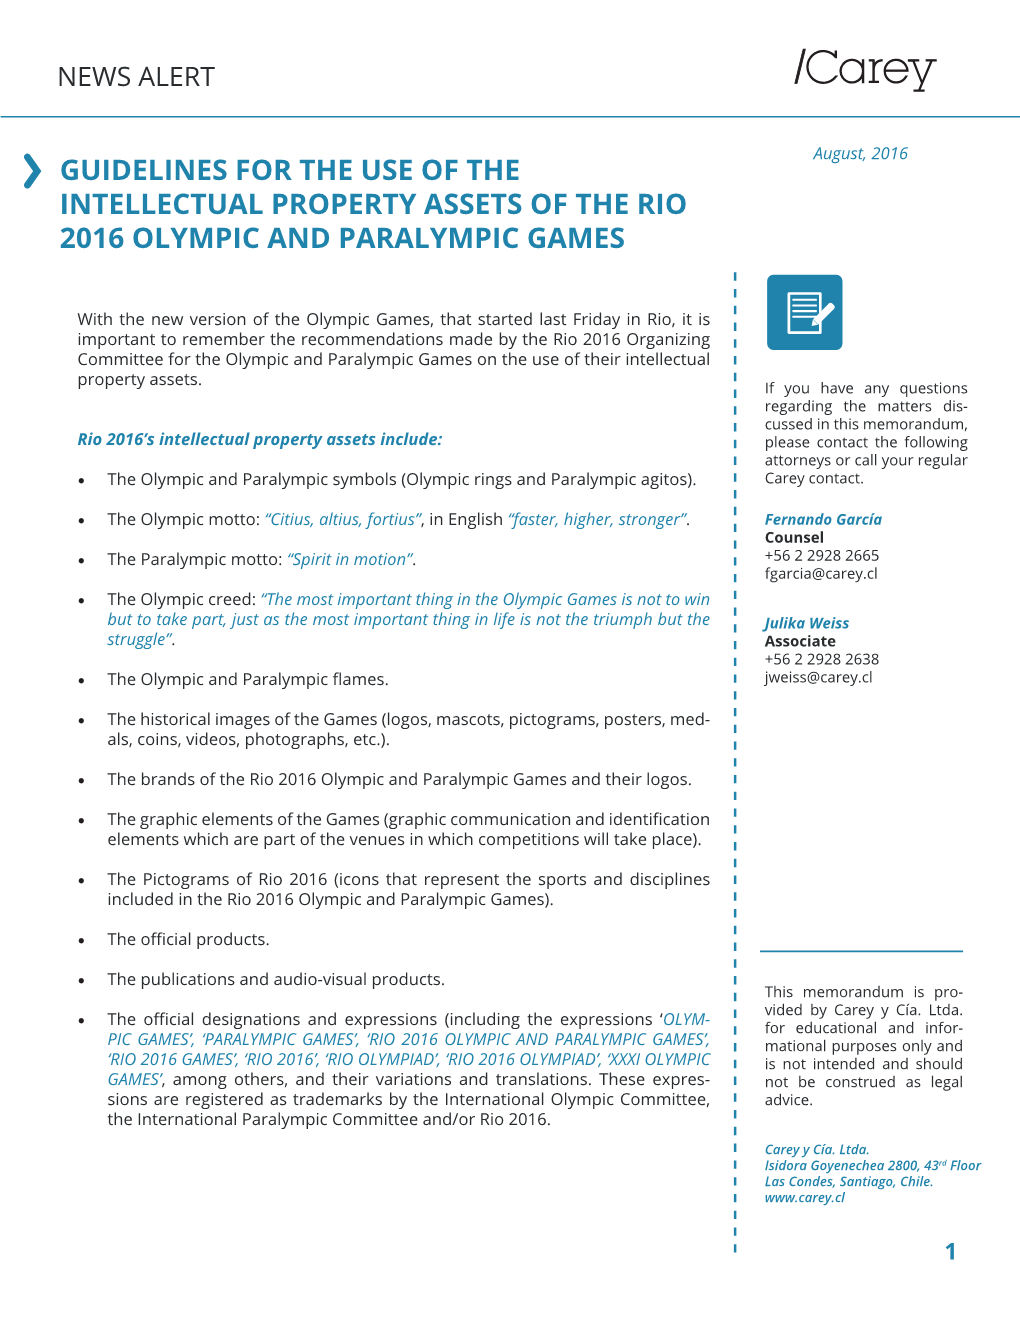 Guidelines for the Use of the Intellectual Property Assets of the Rio 2016 Olympic and Paralympic Games